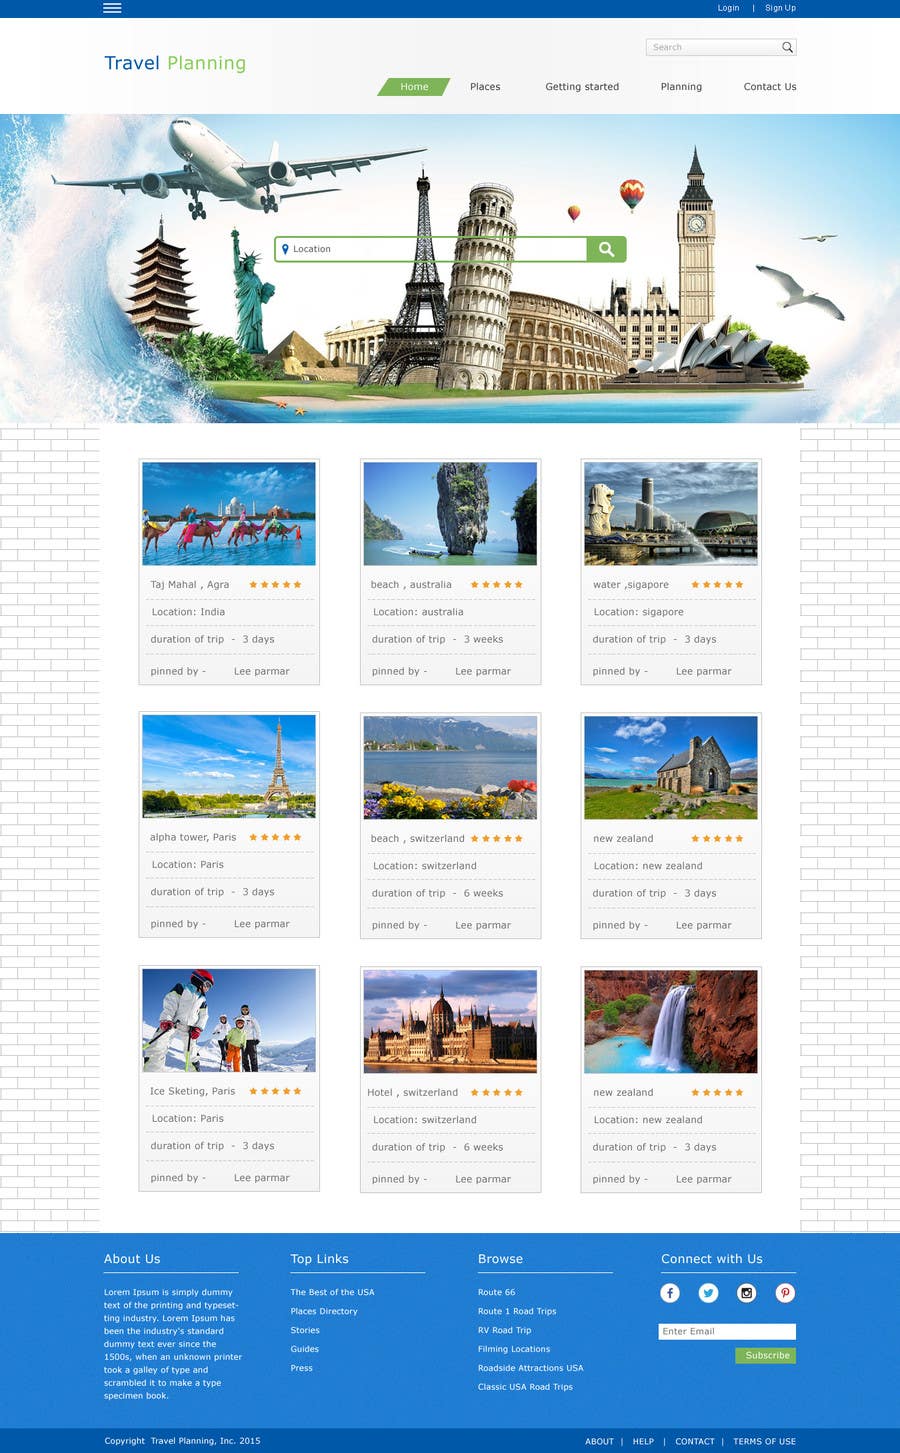 Natečajni vnos #4 za                                                 Design for travel planning site (landing page and initial interaction)
                                            